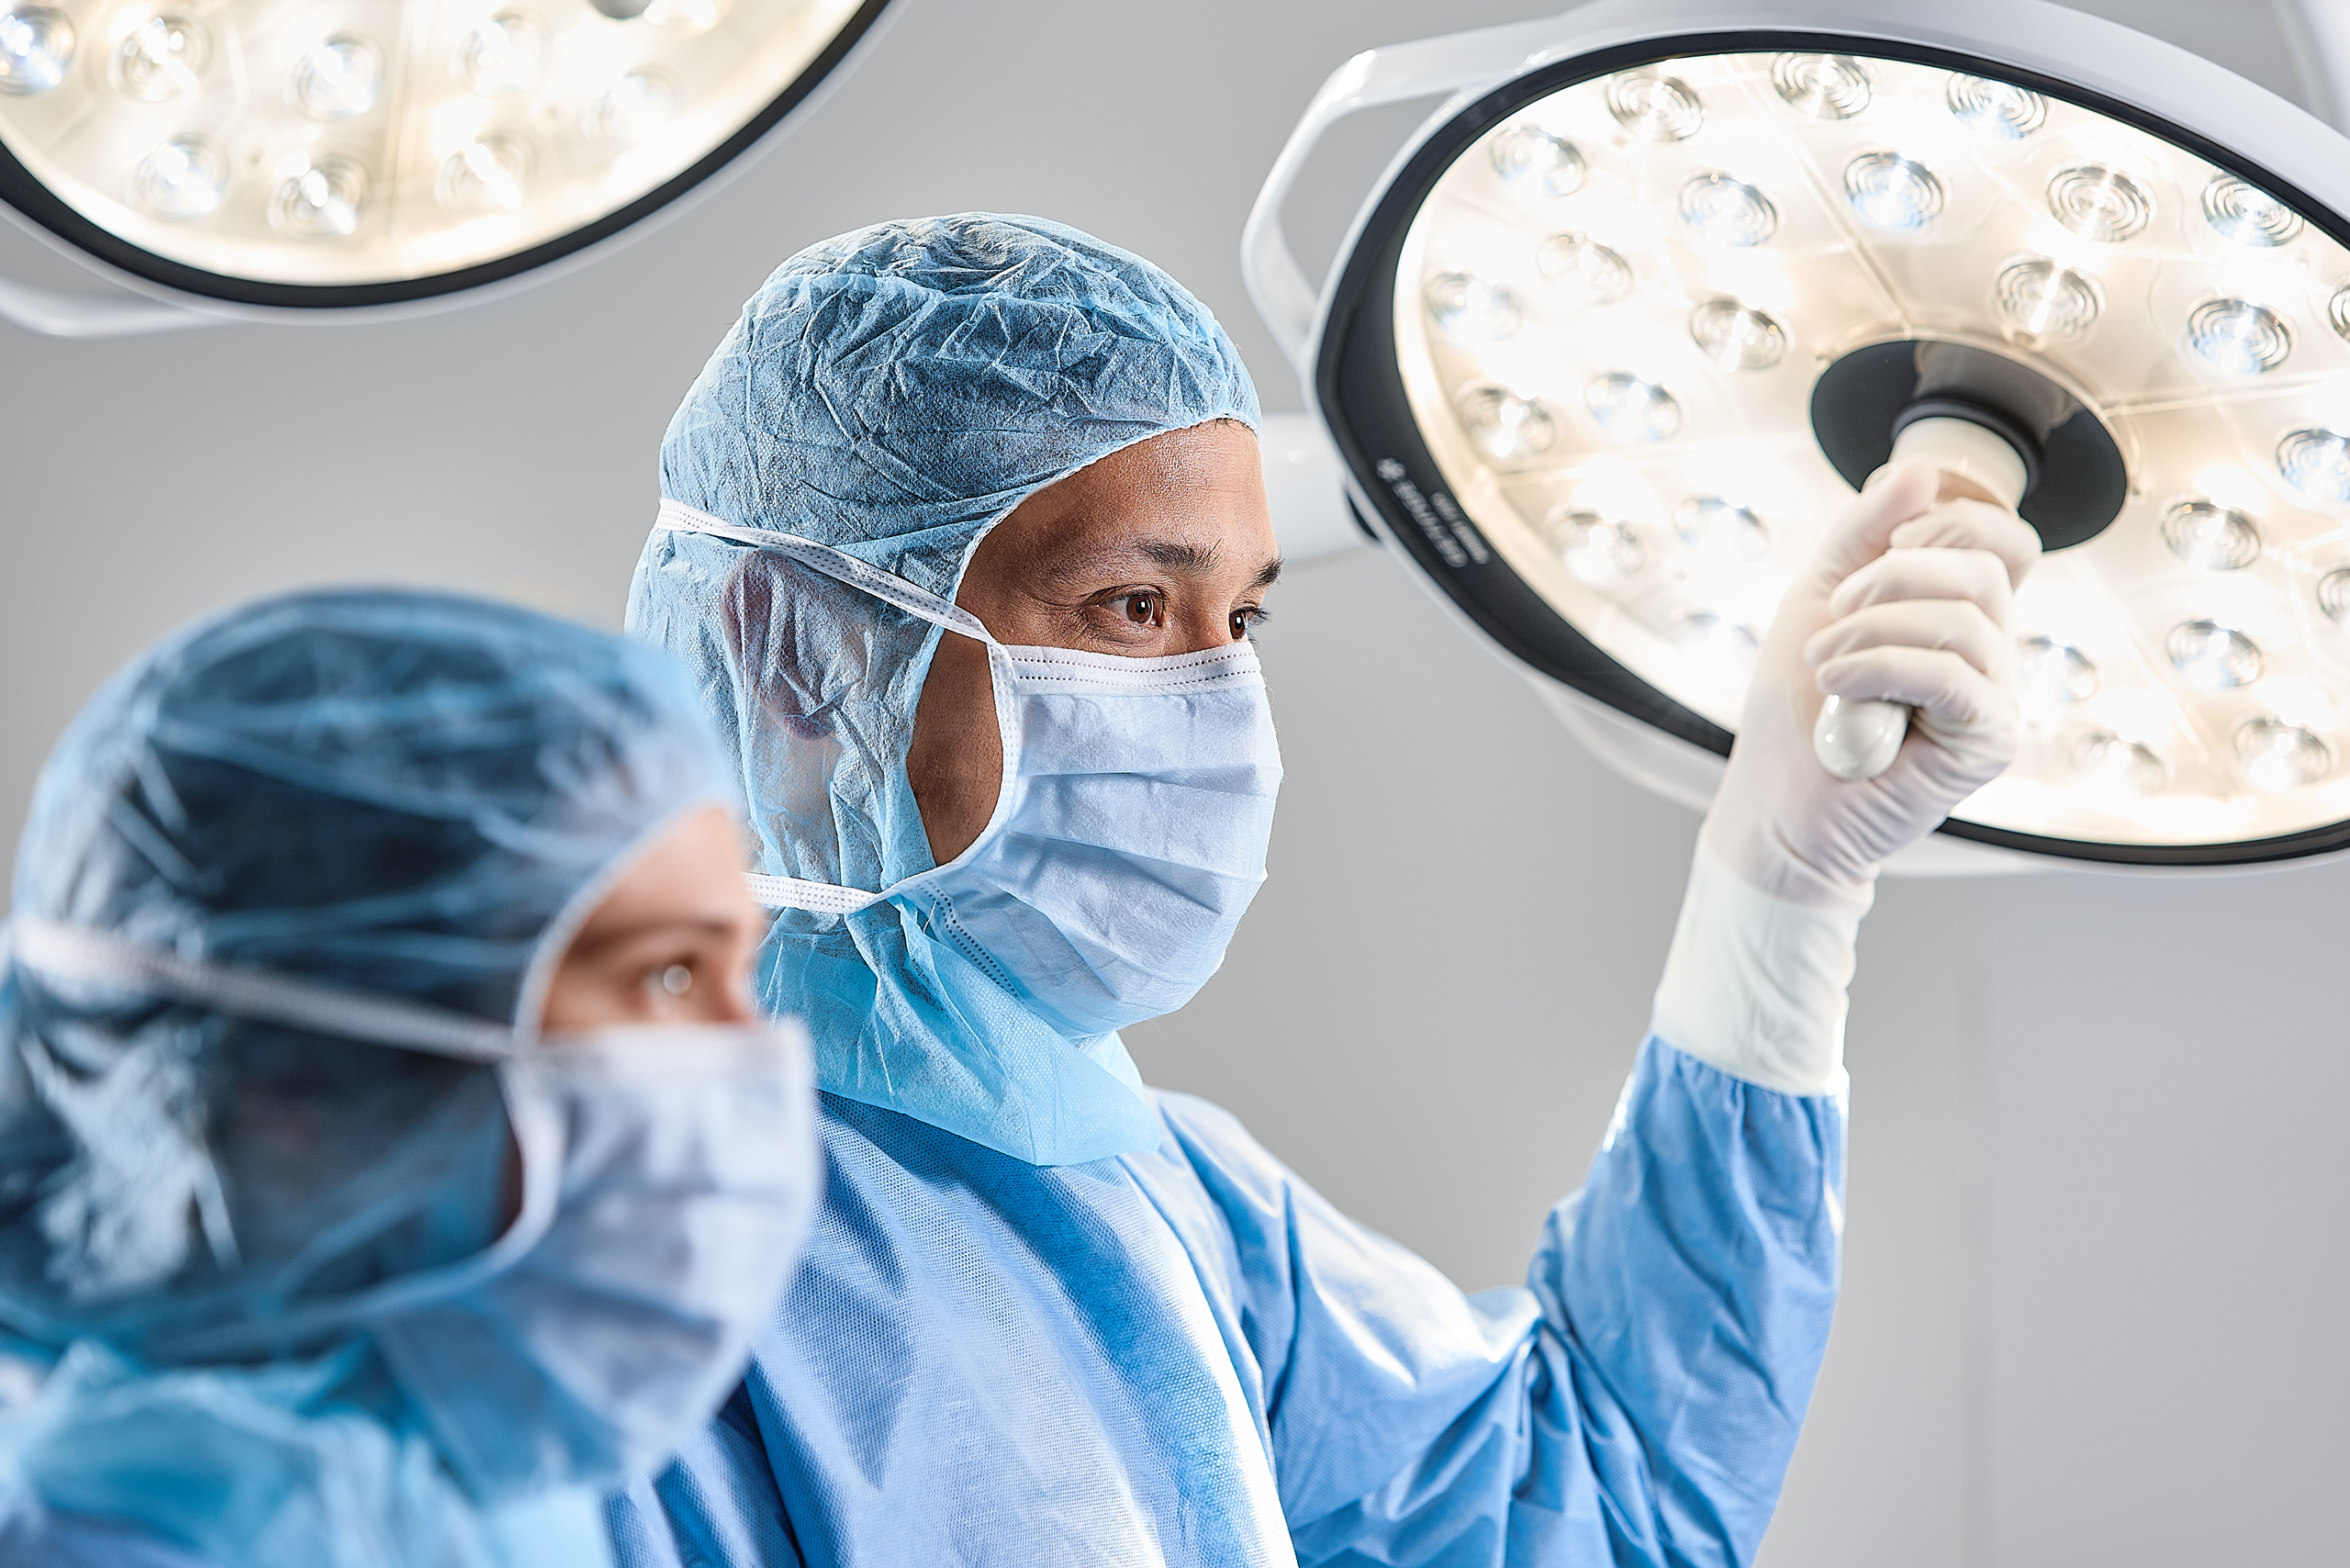 Maquet Ezea Surgical Light allows a fast learning curve for a seamless surgical setup